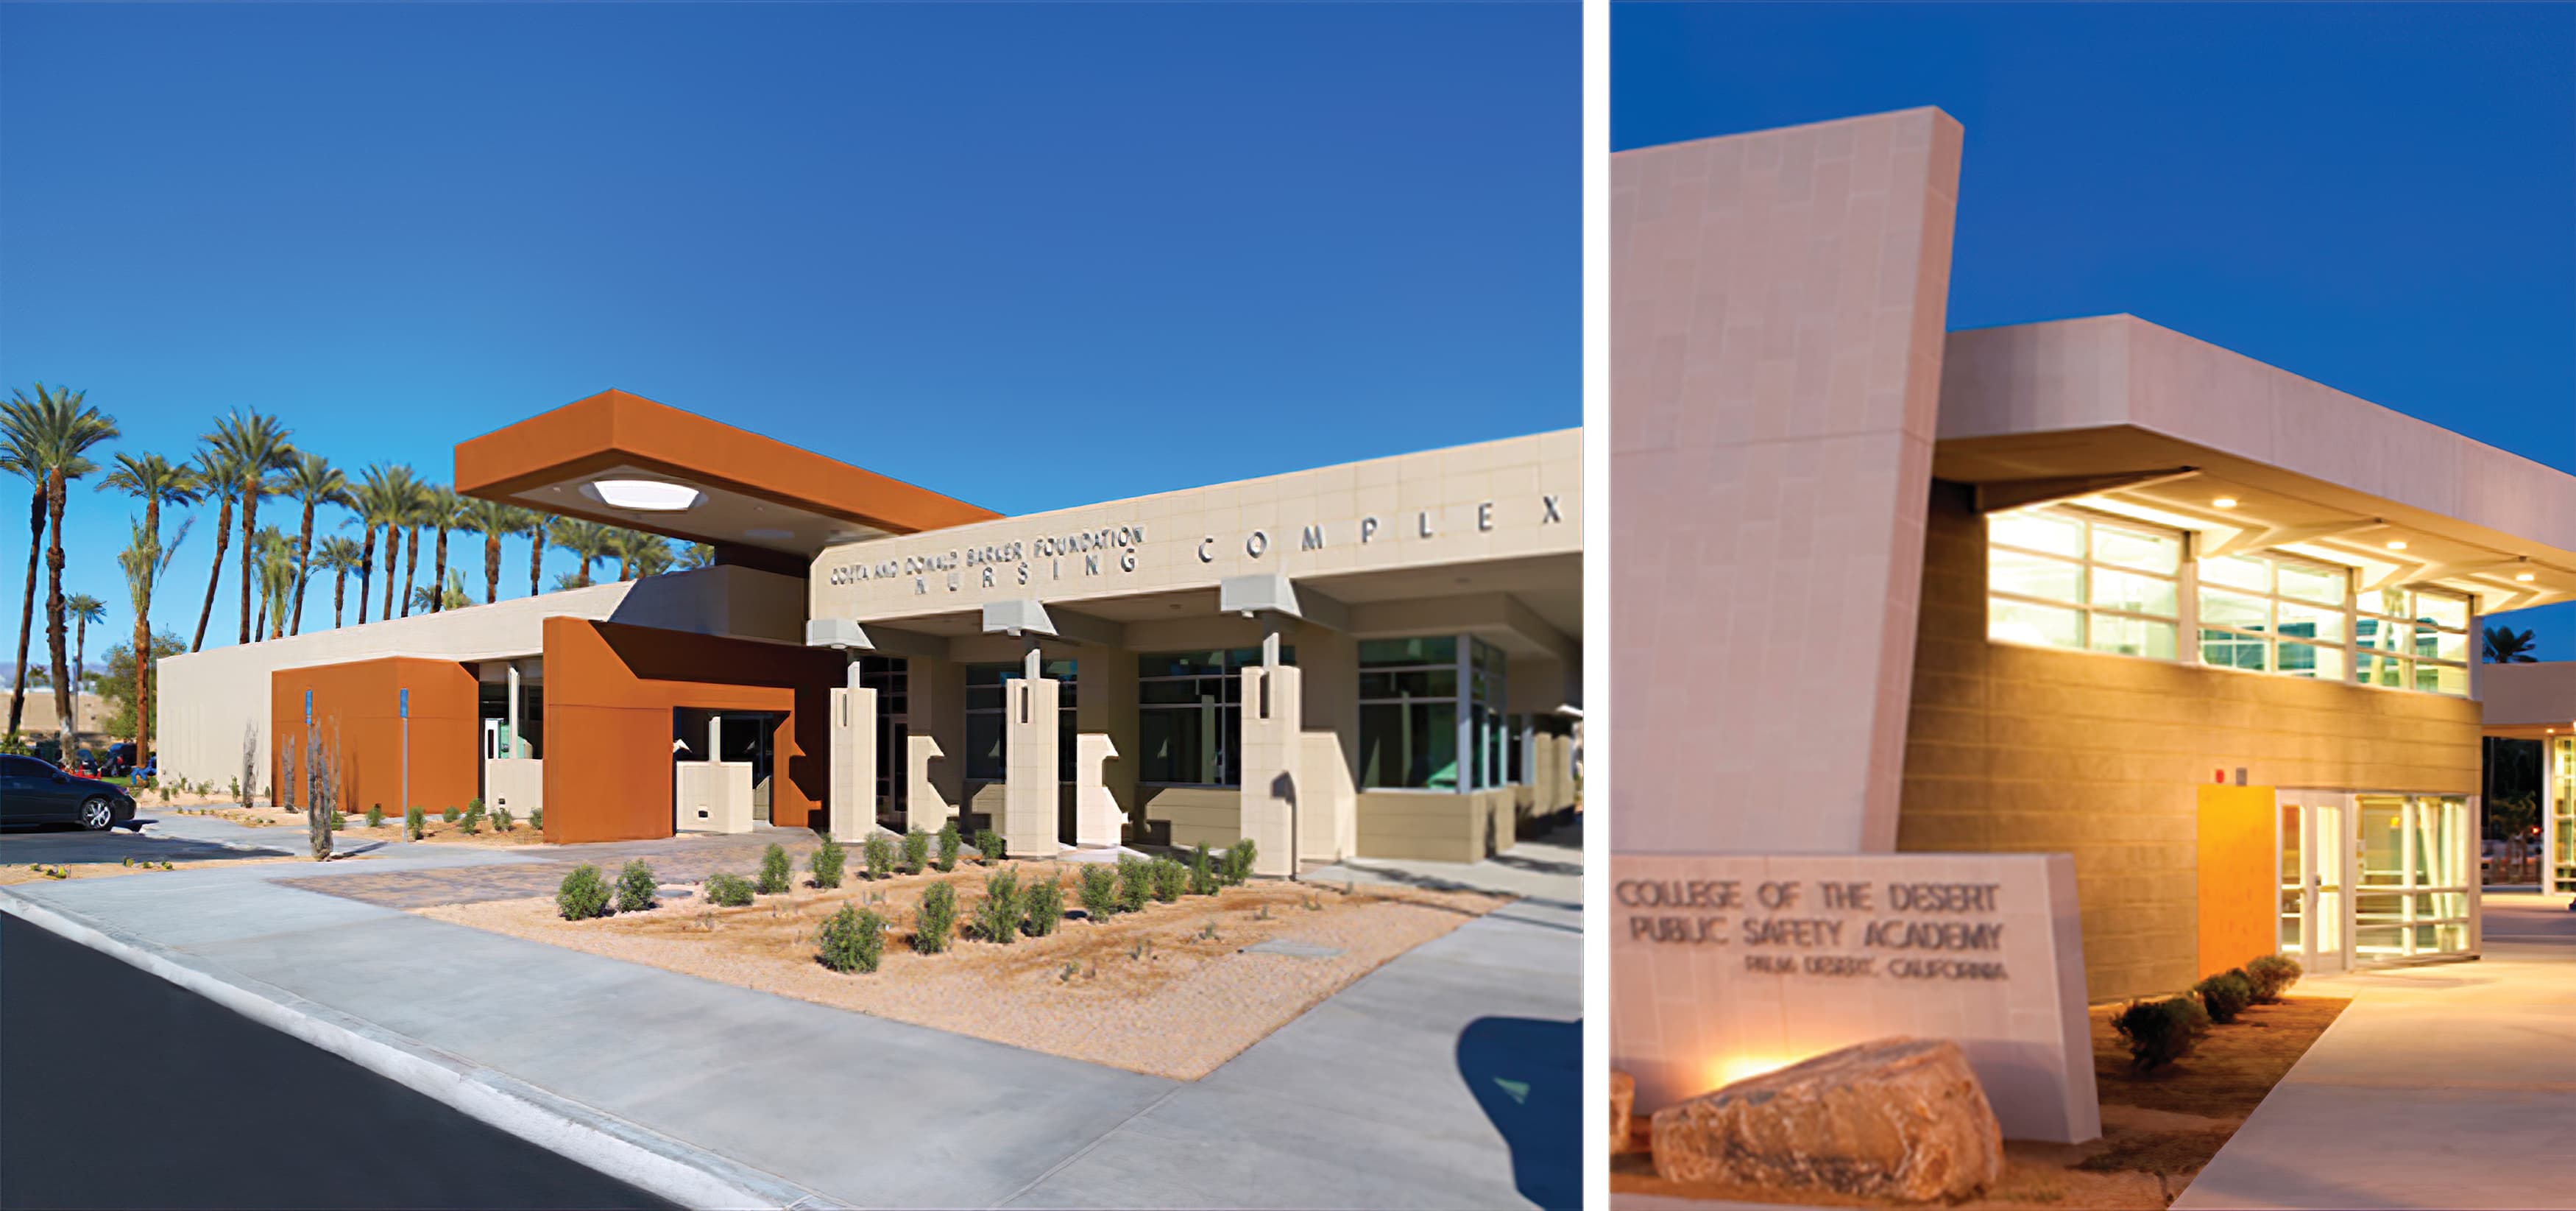 College of the Desert in Palm Springs, California. RSM Design created the campus wide signage guidelines, which includes both vehicular and pedestrian wayfinding and building identities.